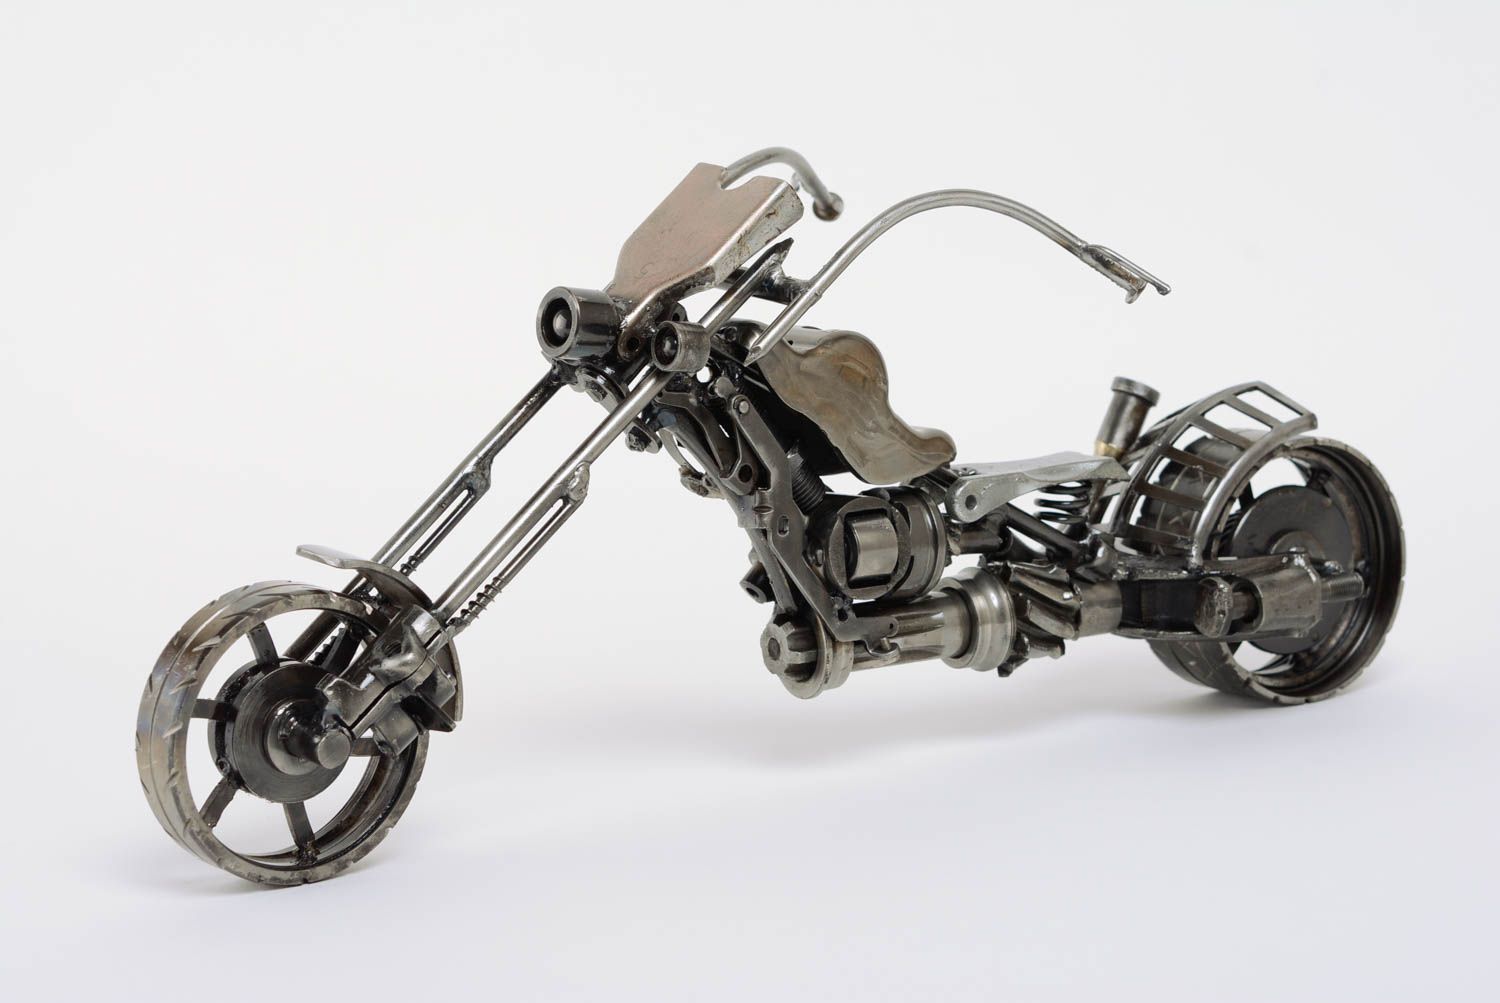 Statuette made of metal parts techno art handmade decorative motorcycle  photo 1